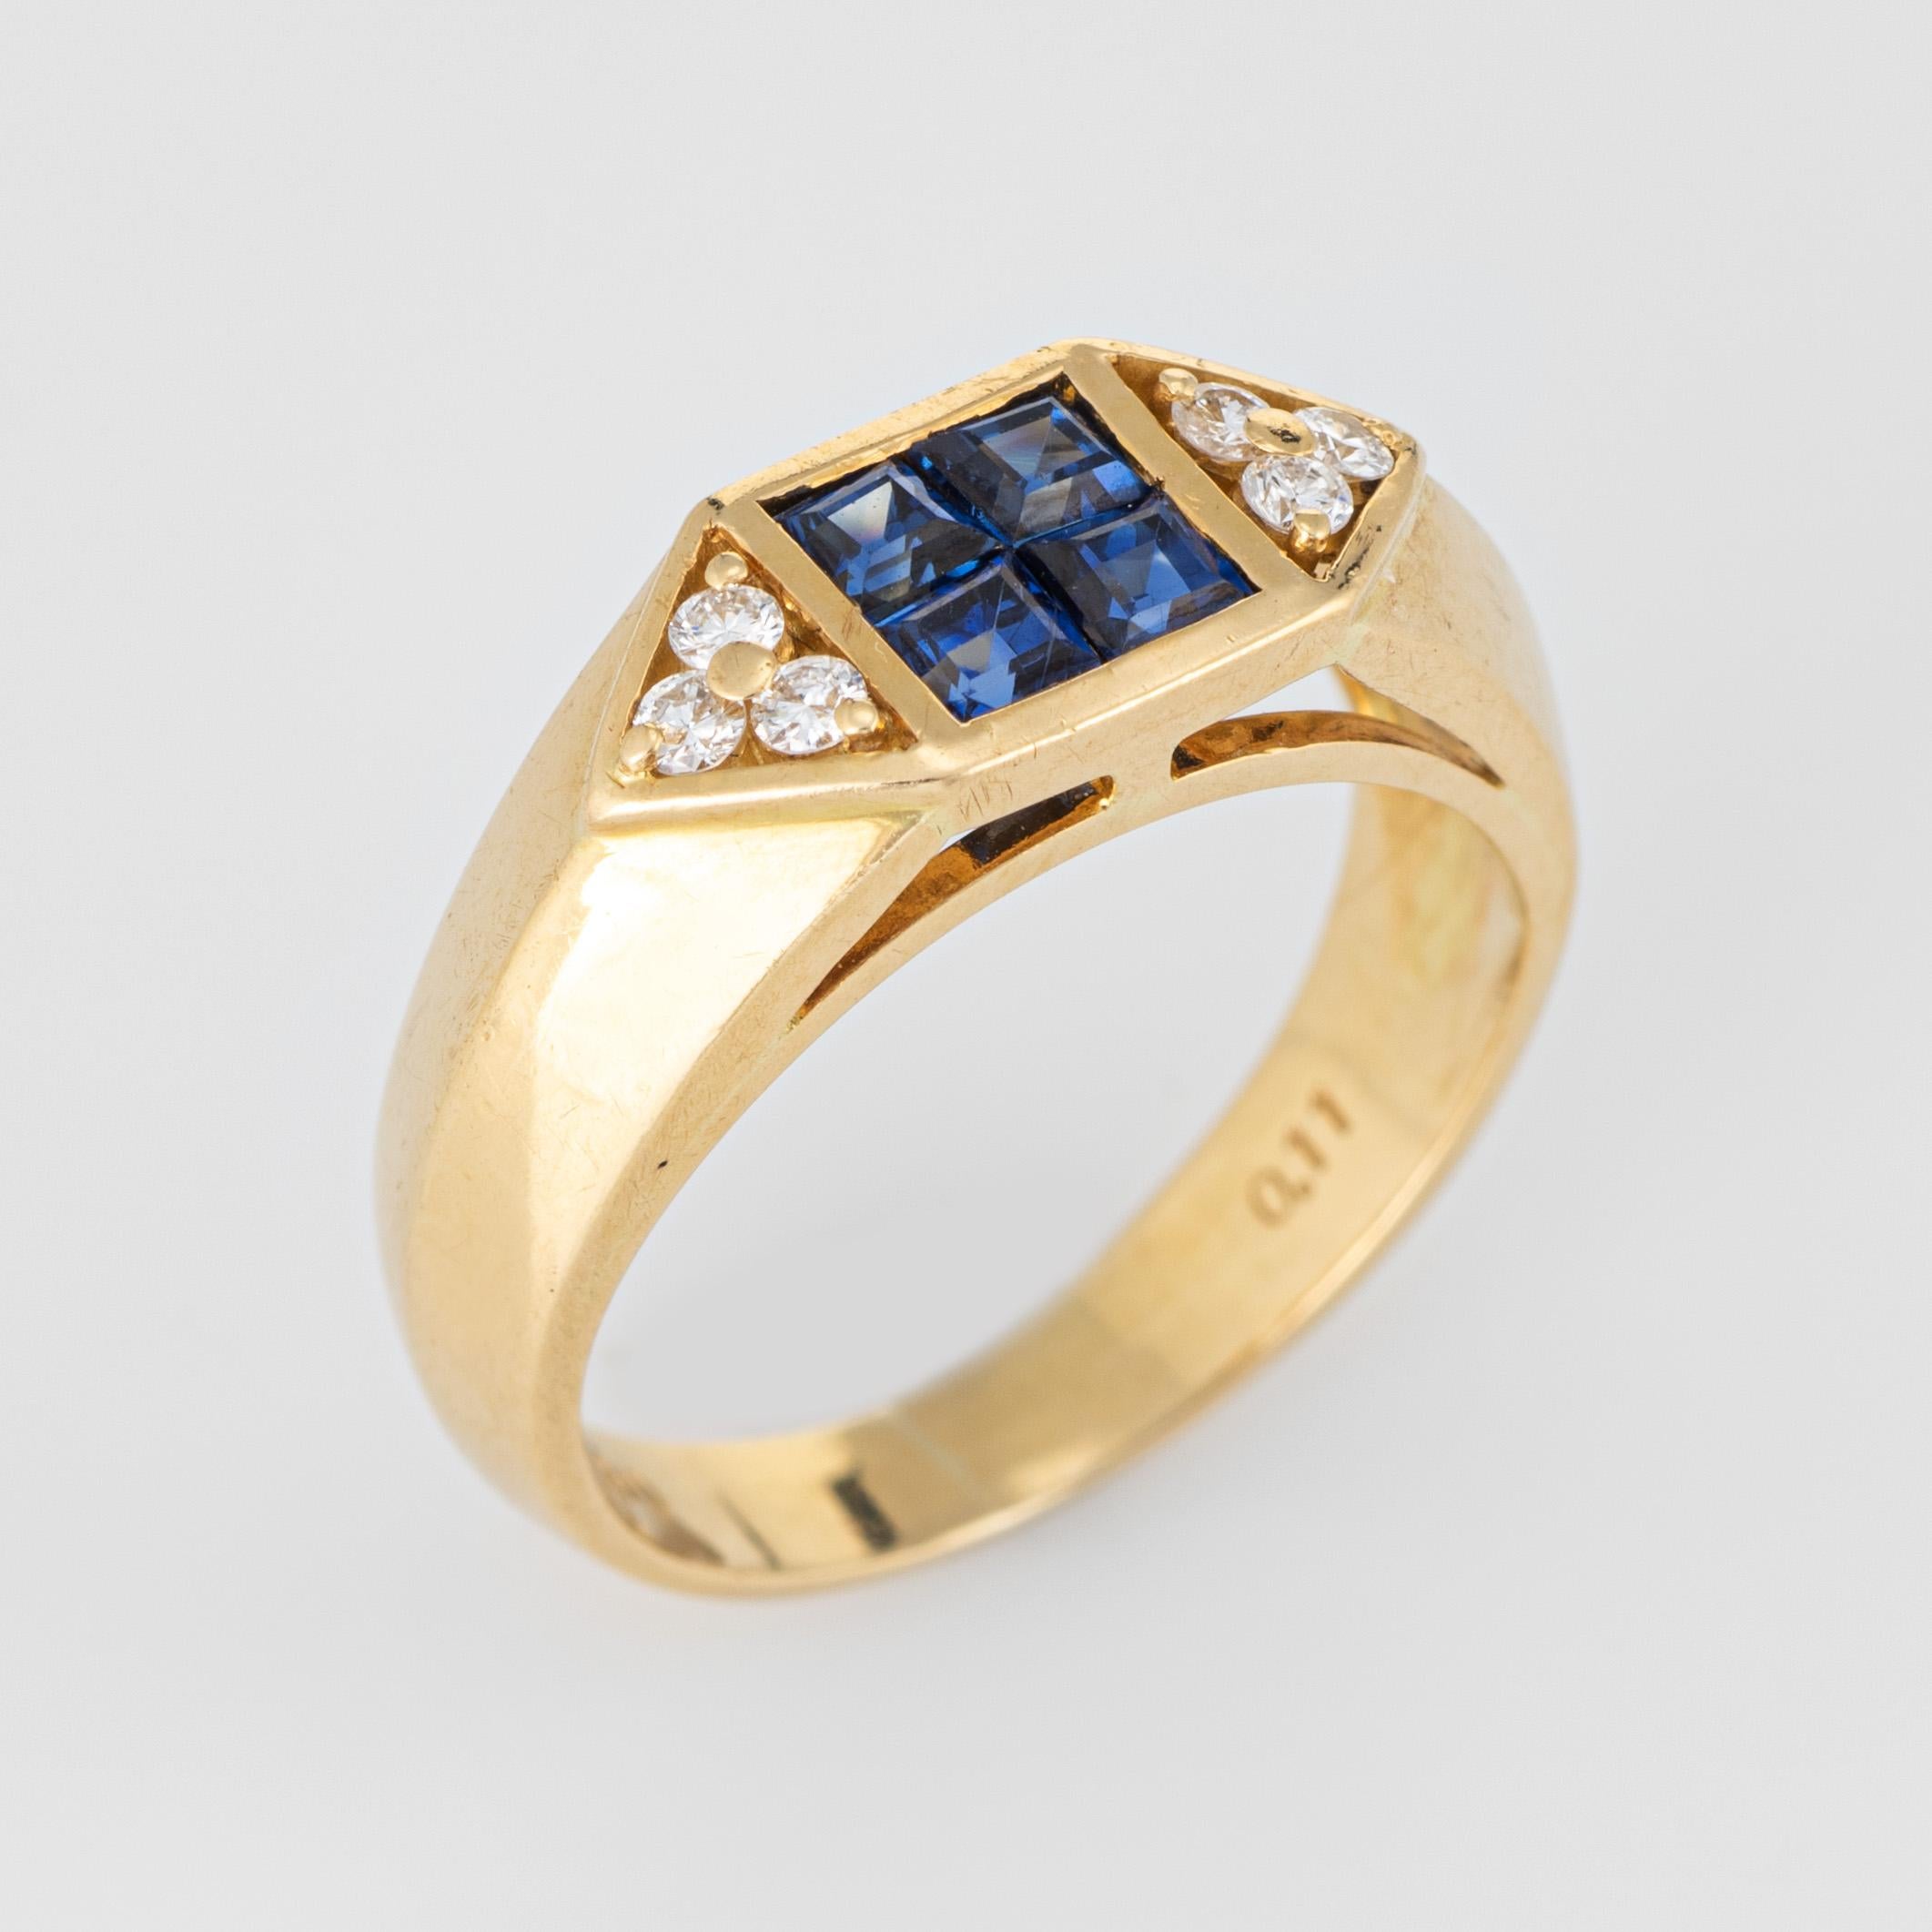 Stylish sapphire & diamond band crafted in 18 karat yellow gold. 

Blue sapphires total 0.60 carats and diamonds total 0.11 carats (estimated at H-I color and SI1-2 clarity). The sapphires are in excellent condition and free of cracks or chips.